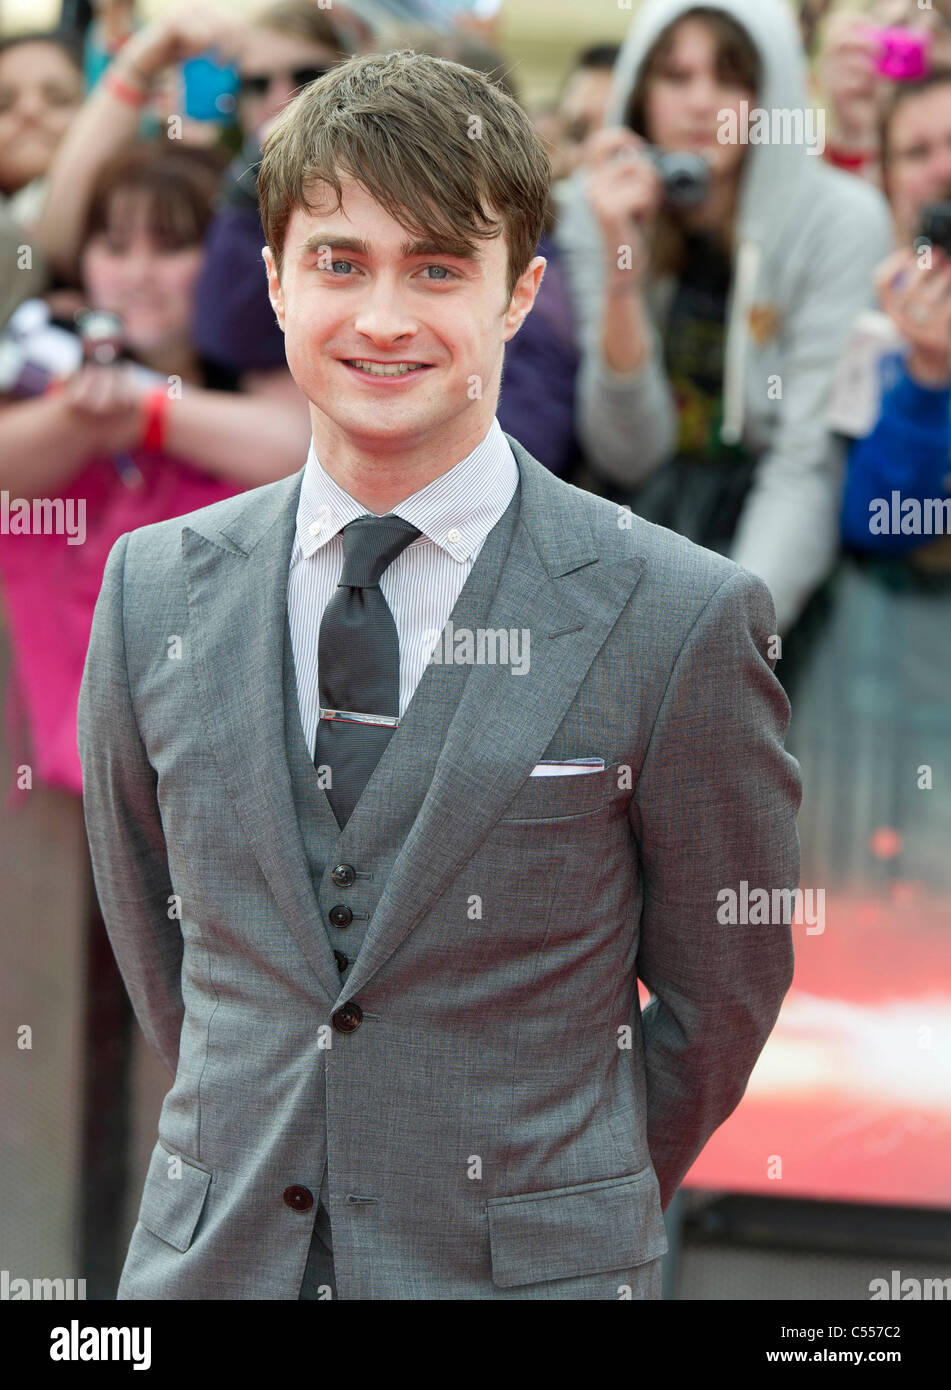 Daniel Radcliffe Harry Potter and the Deathly Hallows Part 2 Banque D'Images